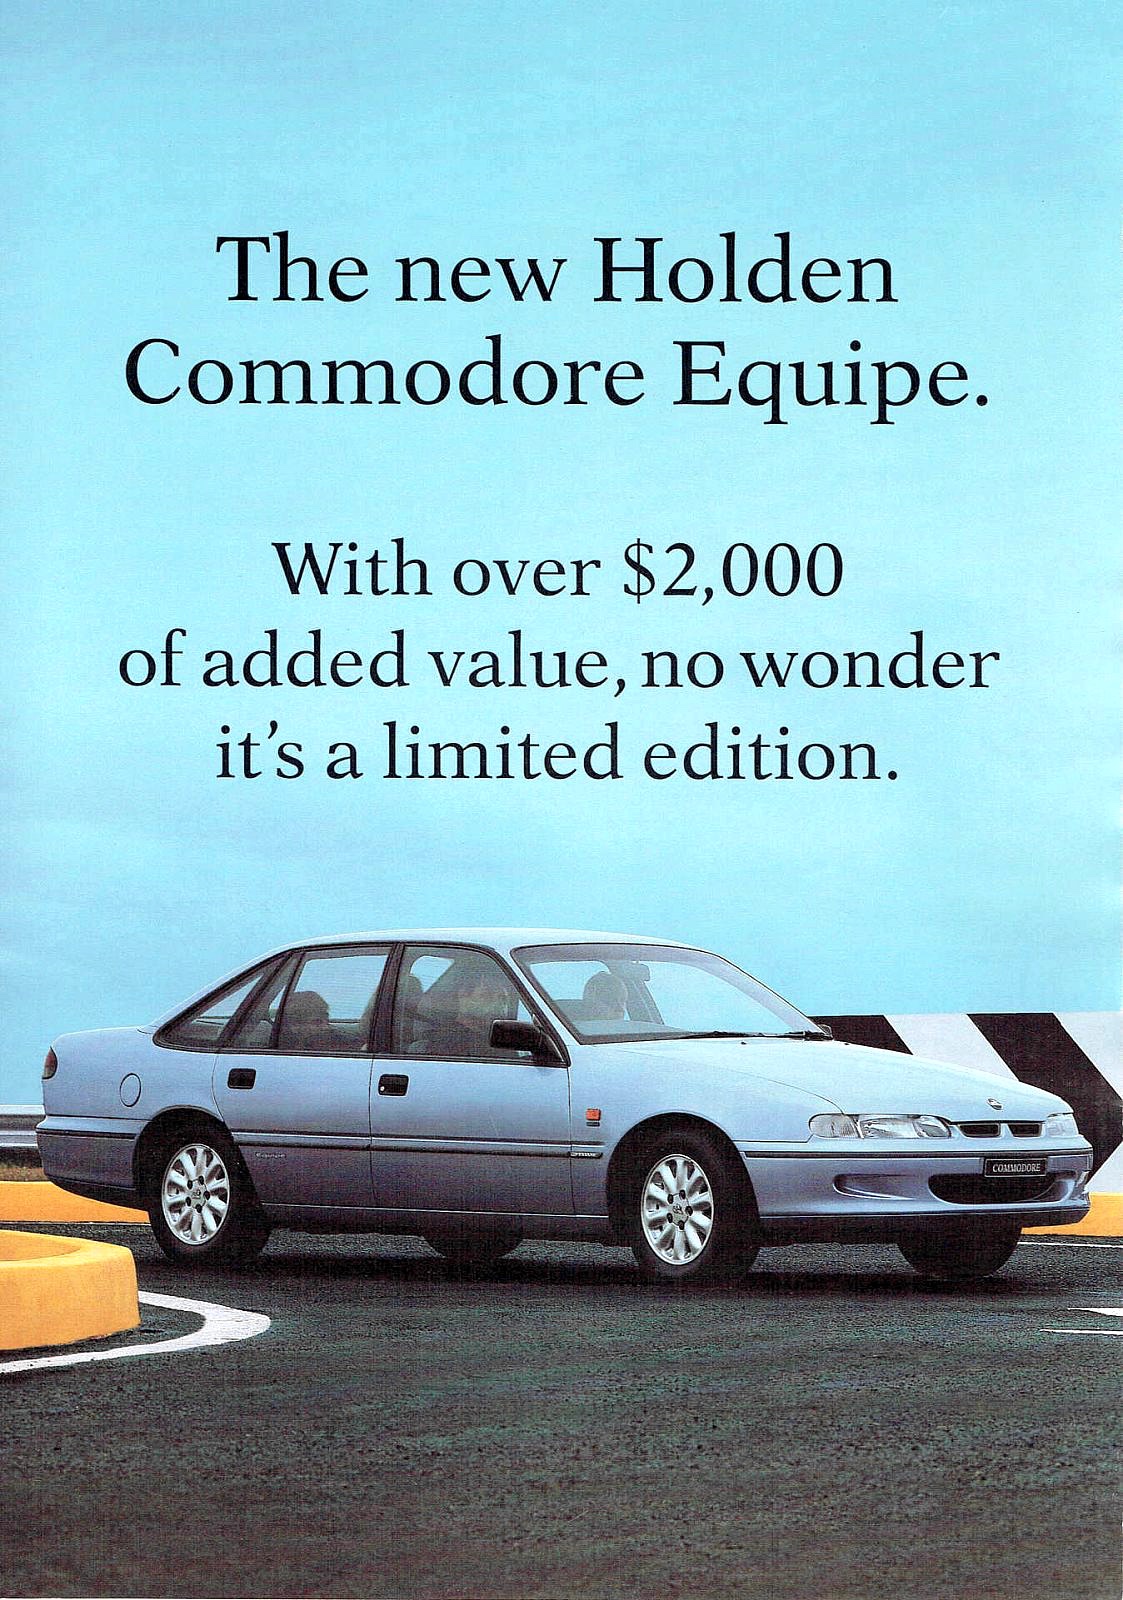 1995 Holden VR Commodore Series II Equipe Brochure Page 2